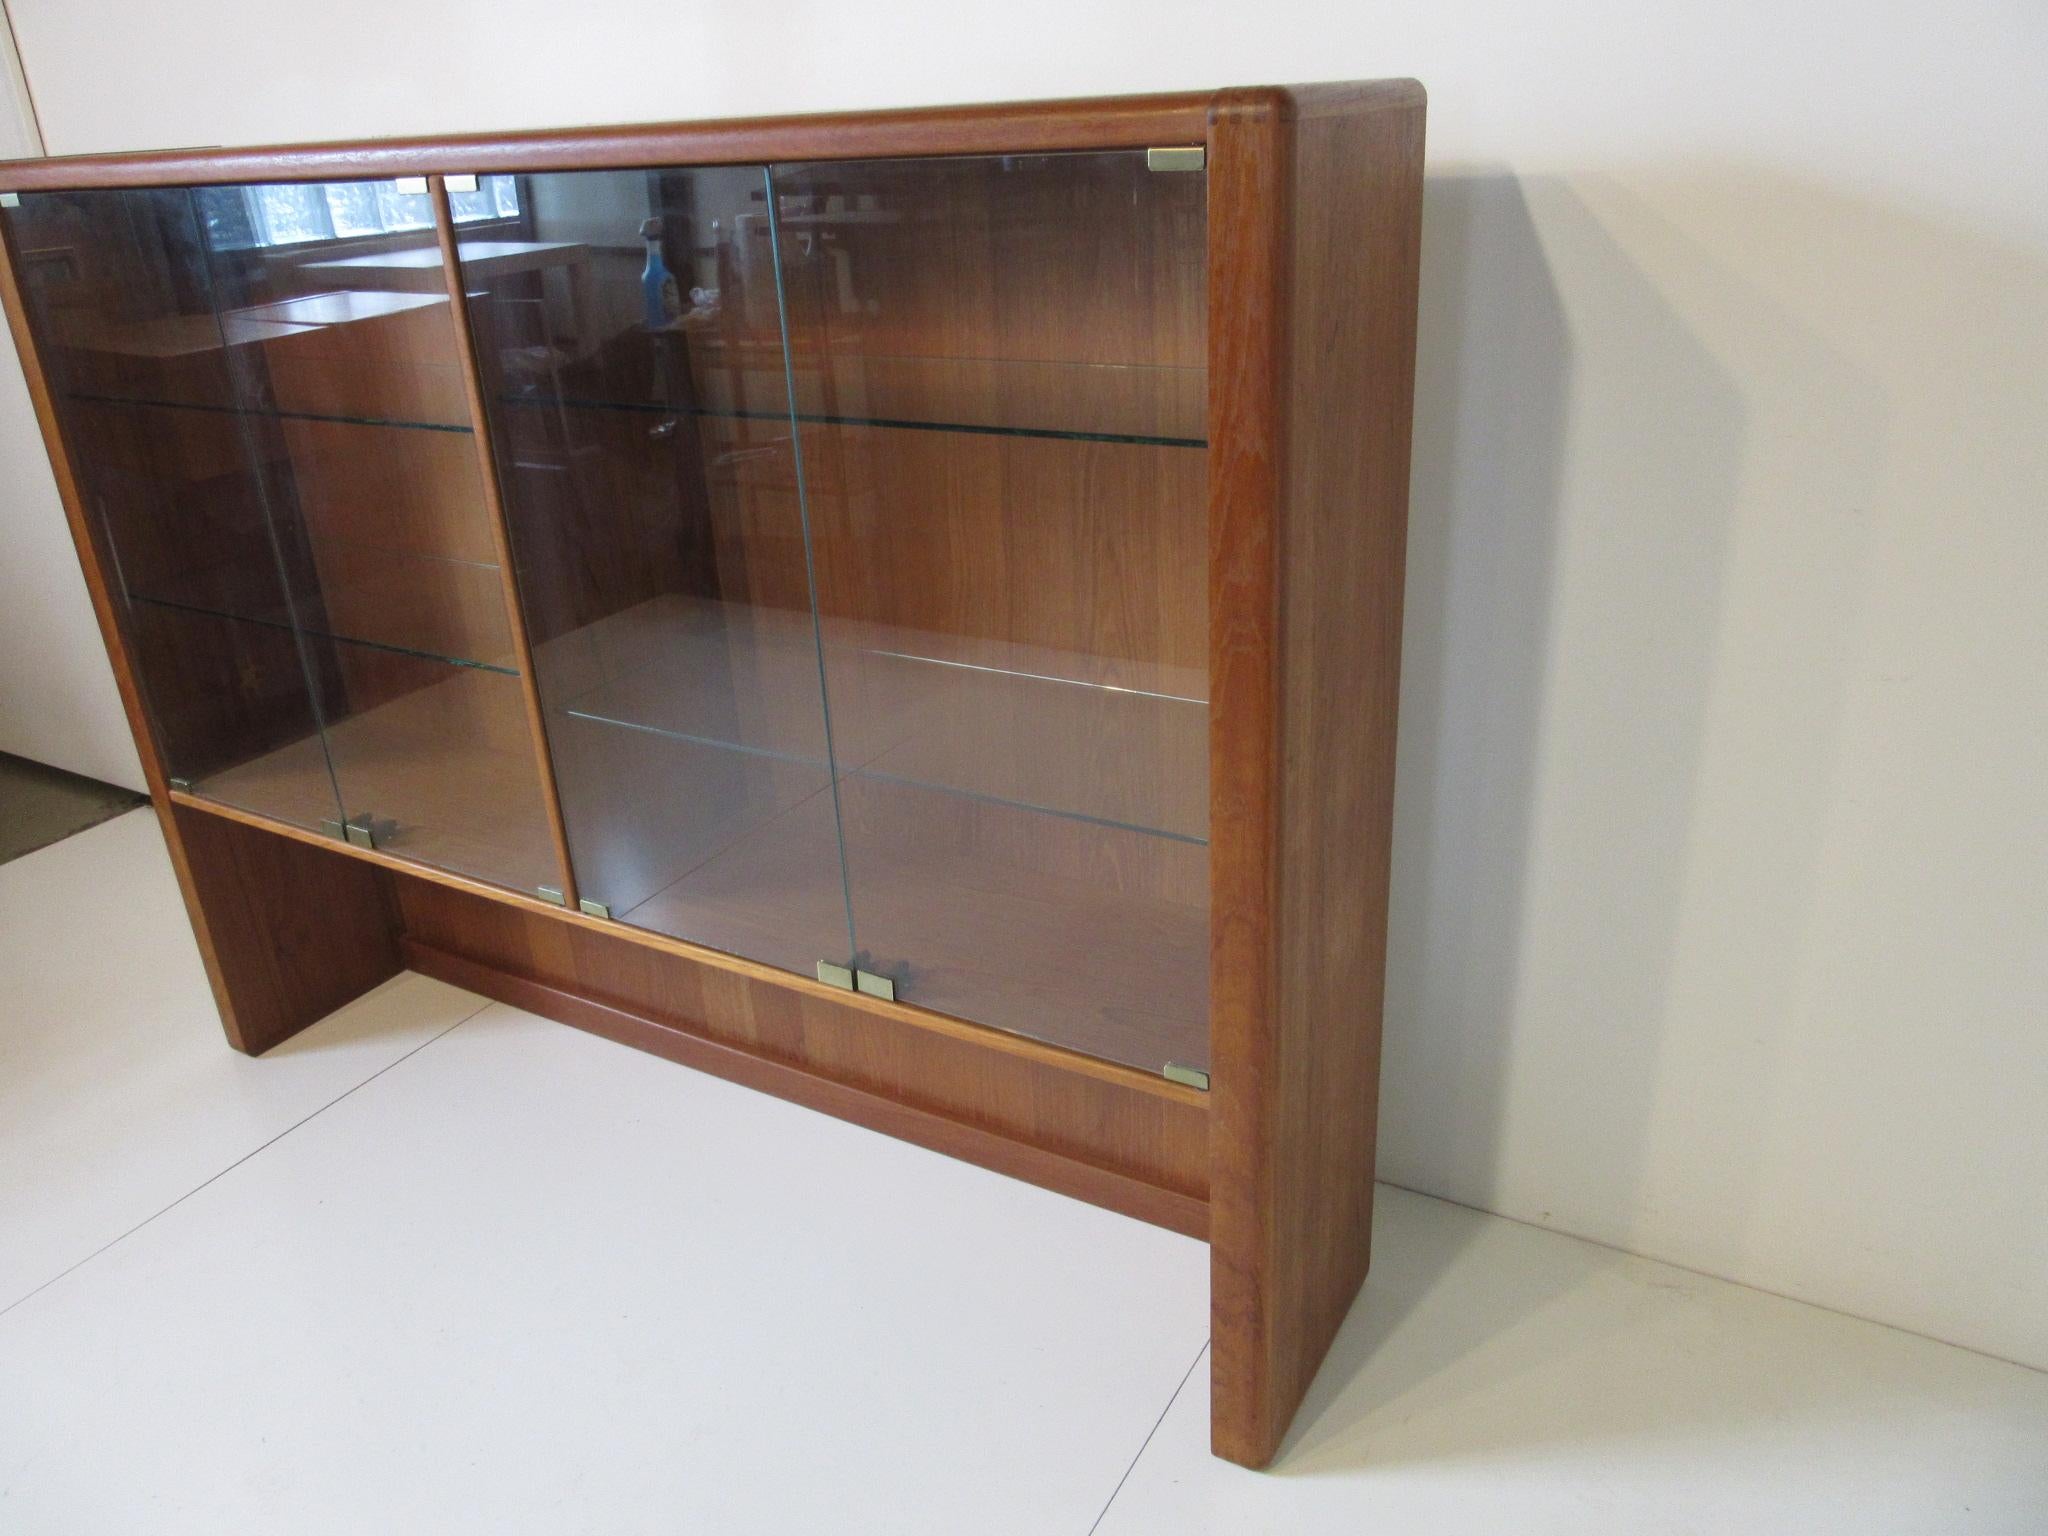 A medium toned teak wood bookcase with push touch glass doors and adjustable glass shelves. The glass doors have brass hardware and finger joint construction to the top corner pieces of the case manufactured by D-Scan imported from Singapore.